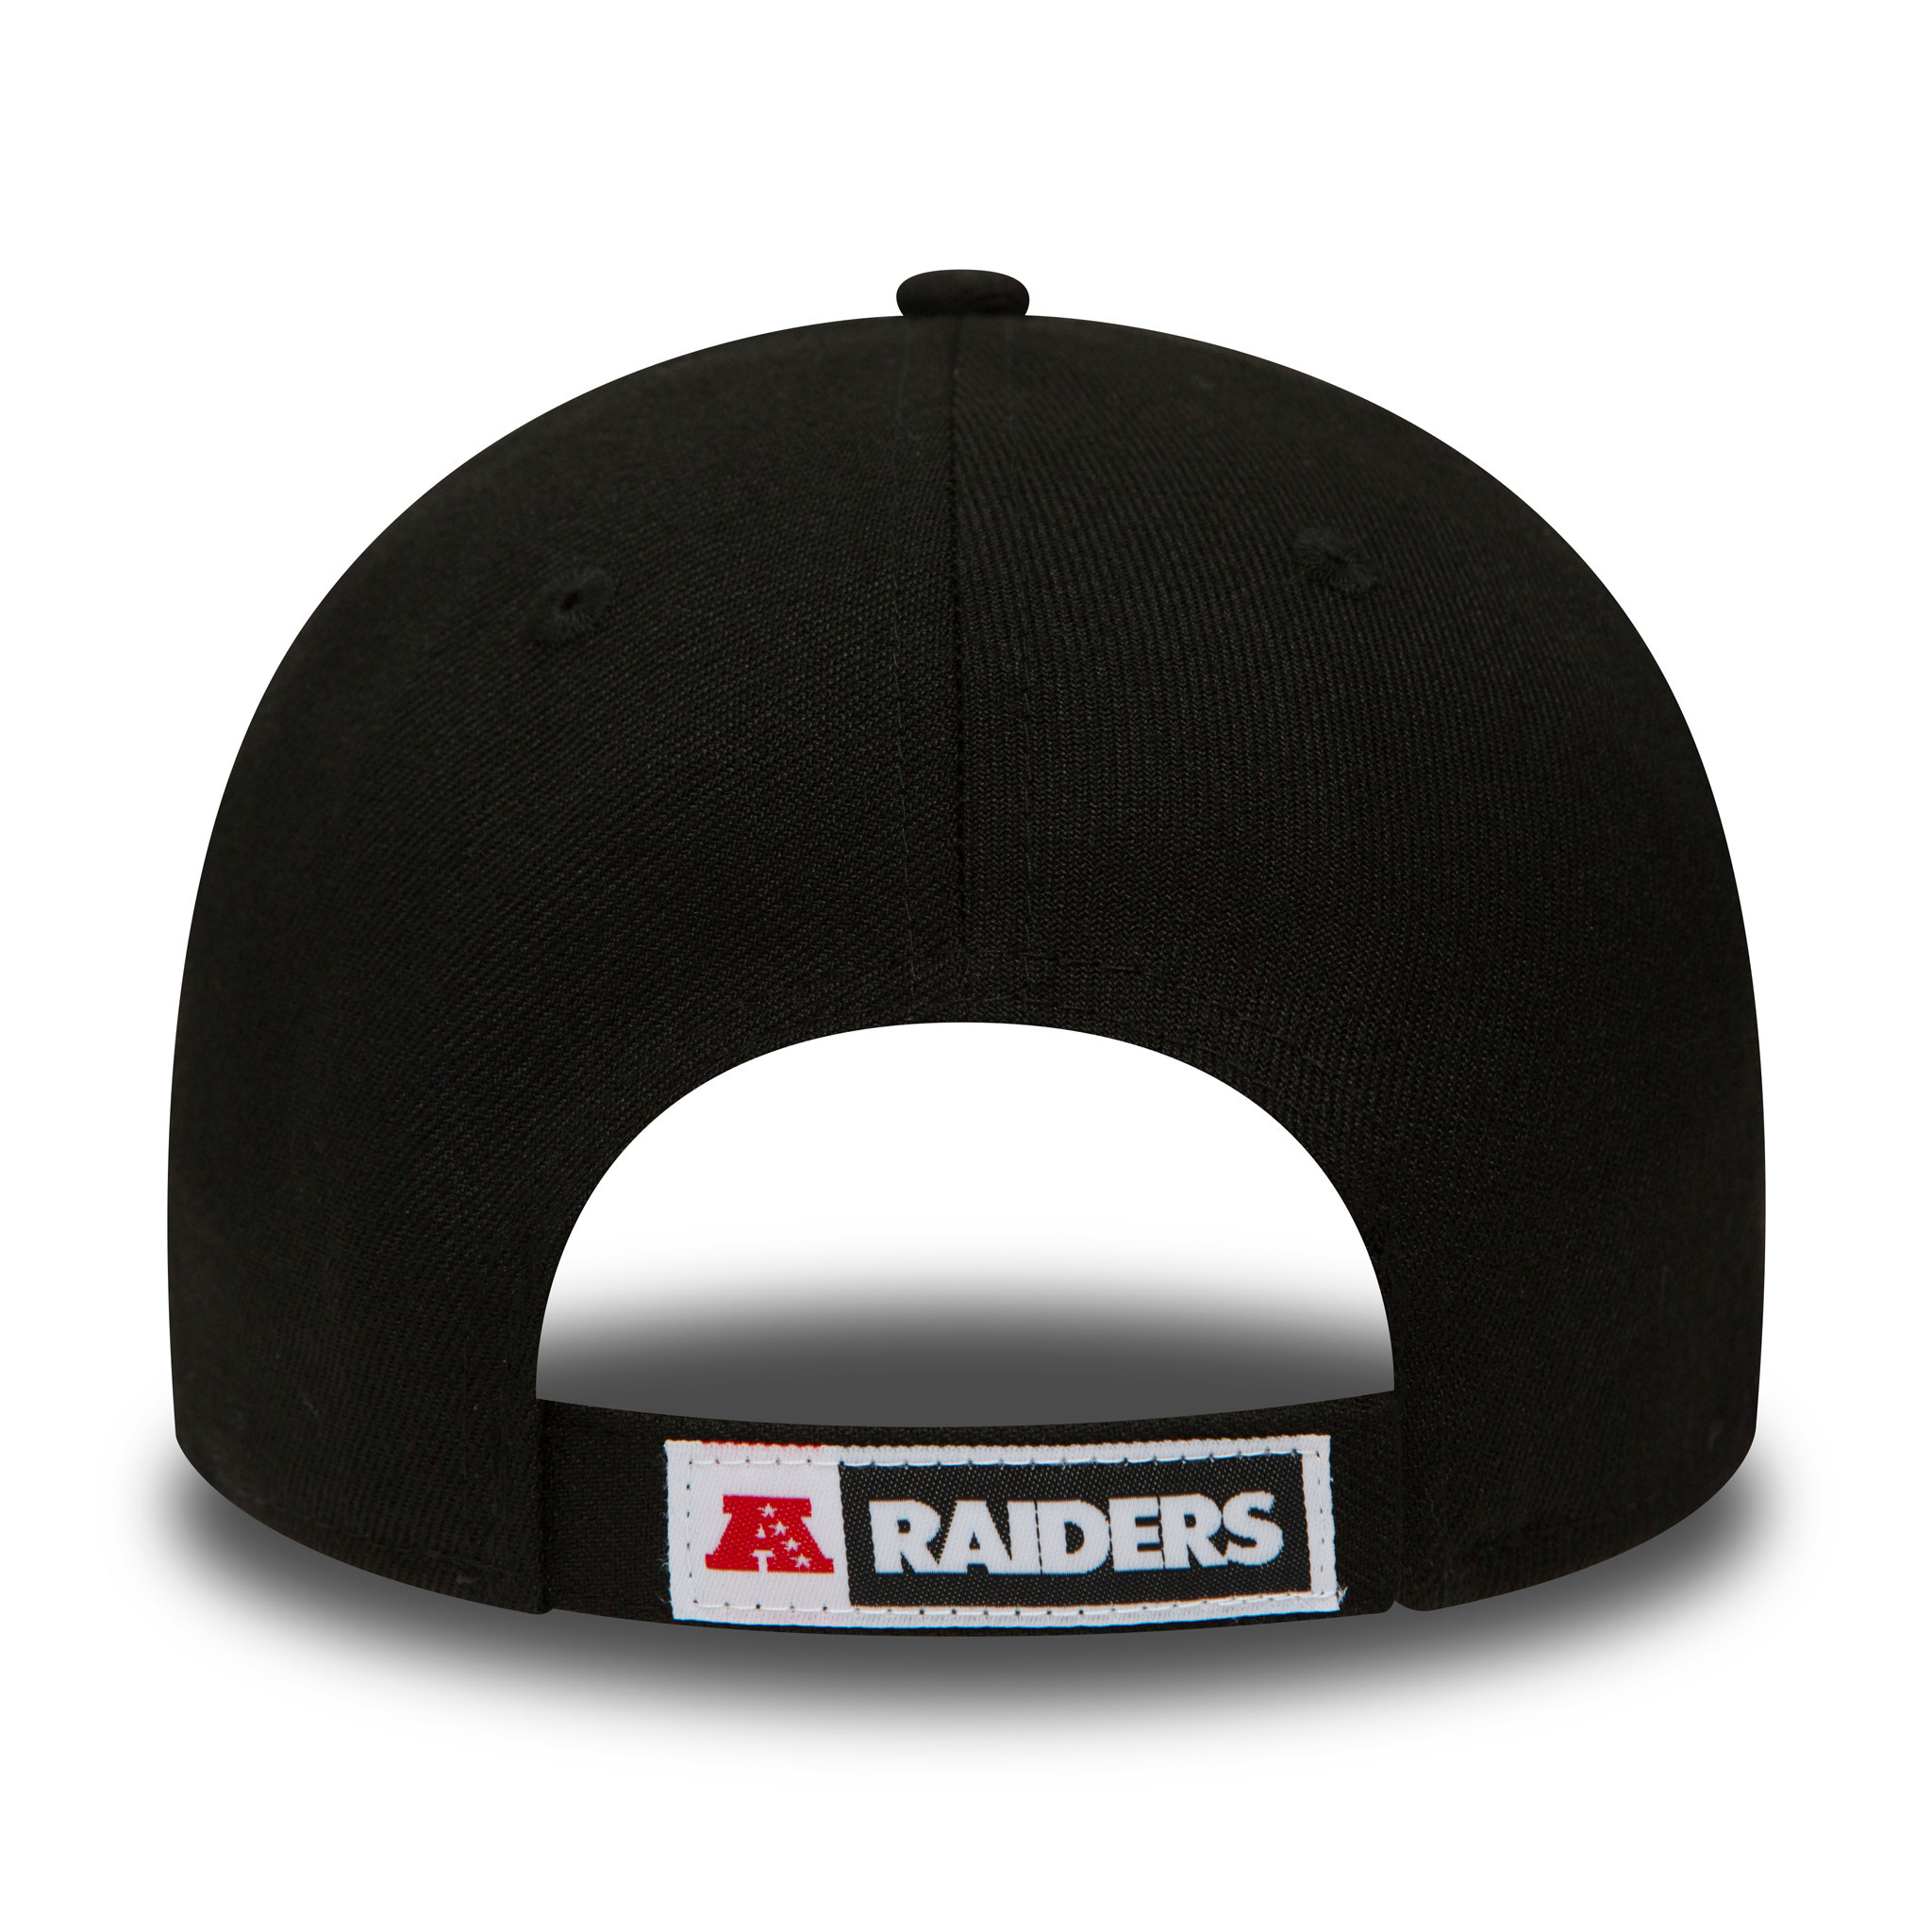 NEW ERA: BAGS AND ACCESSORIES, NEW ERA HOME FIELD 9FORTY LAS VEGAS RAIDERS  BAS